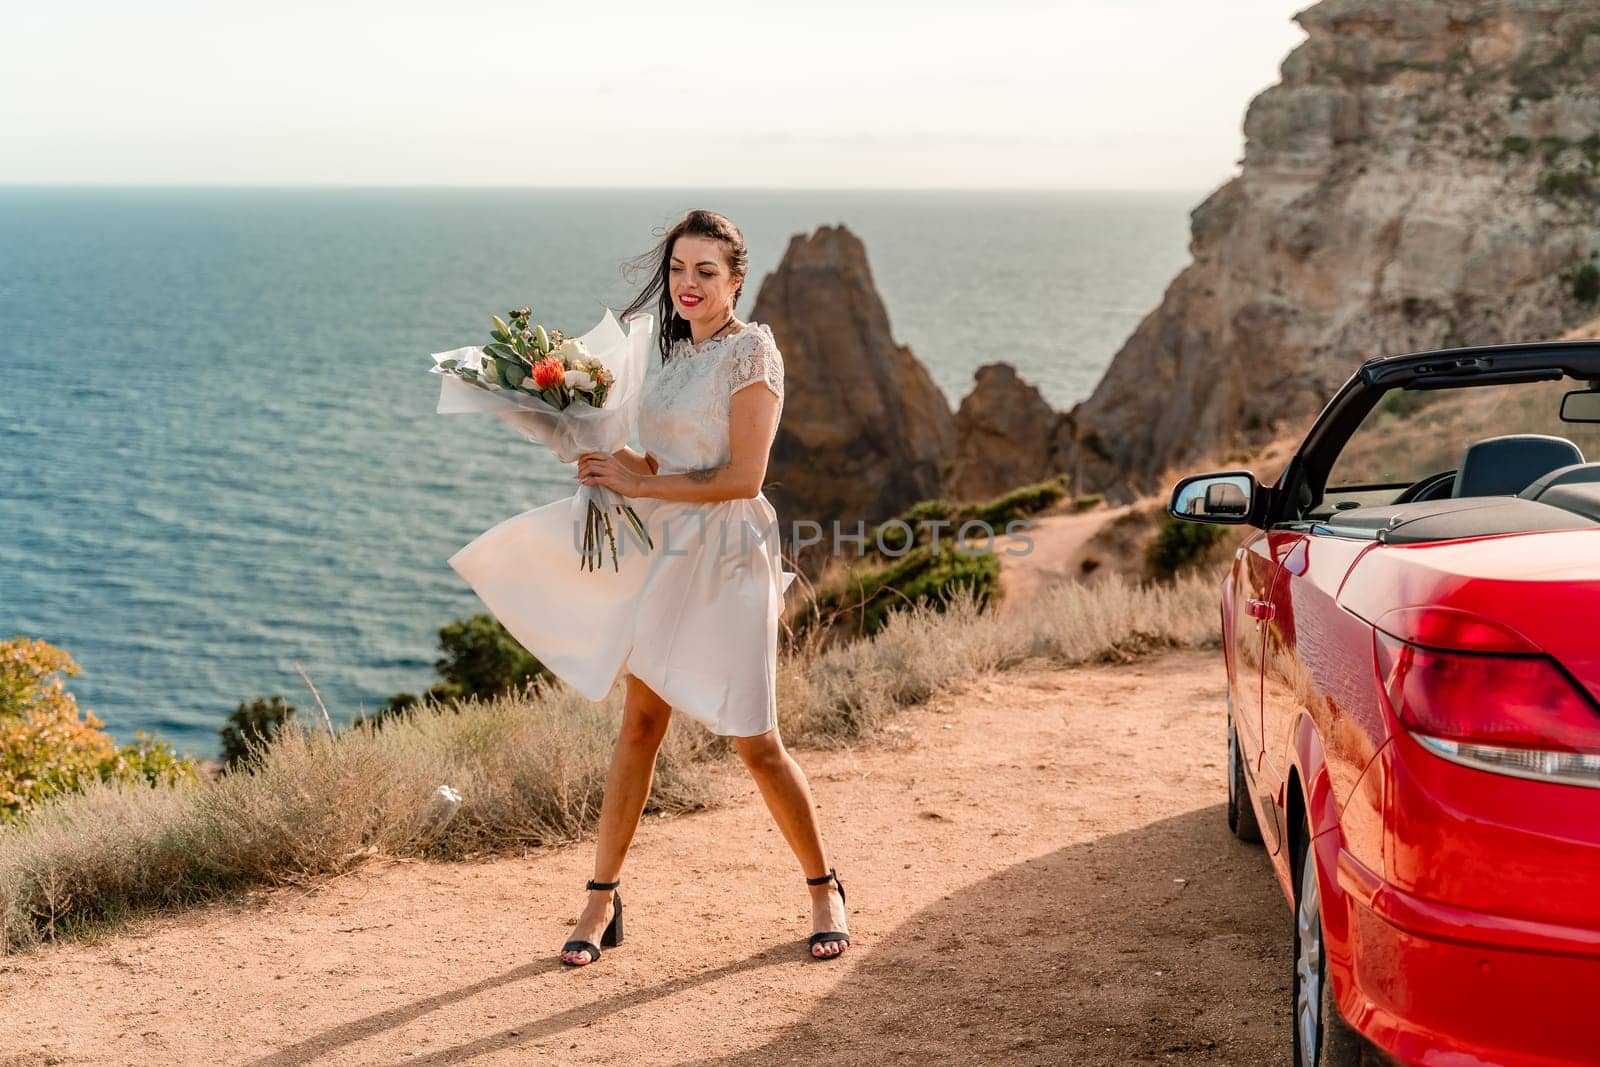 A woman in a white dress is standing next to a red convertible car. She is holding a bouquet of flowers and she is in a happy mood. The scene suggests a romantic or special occasion